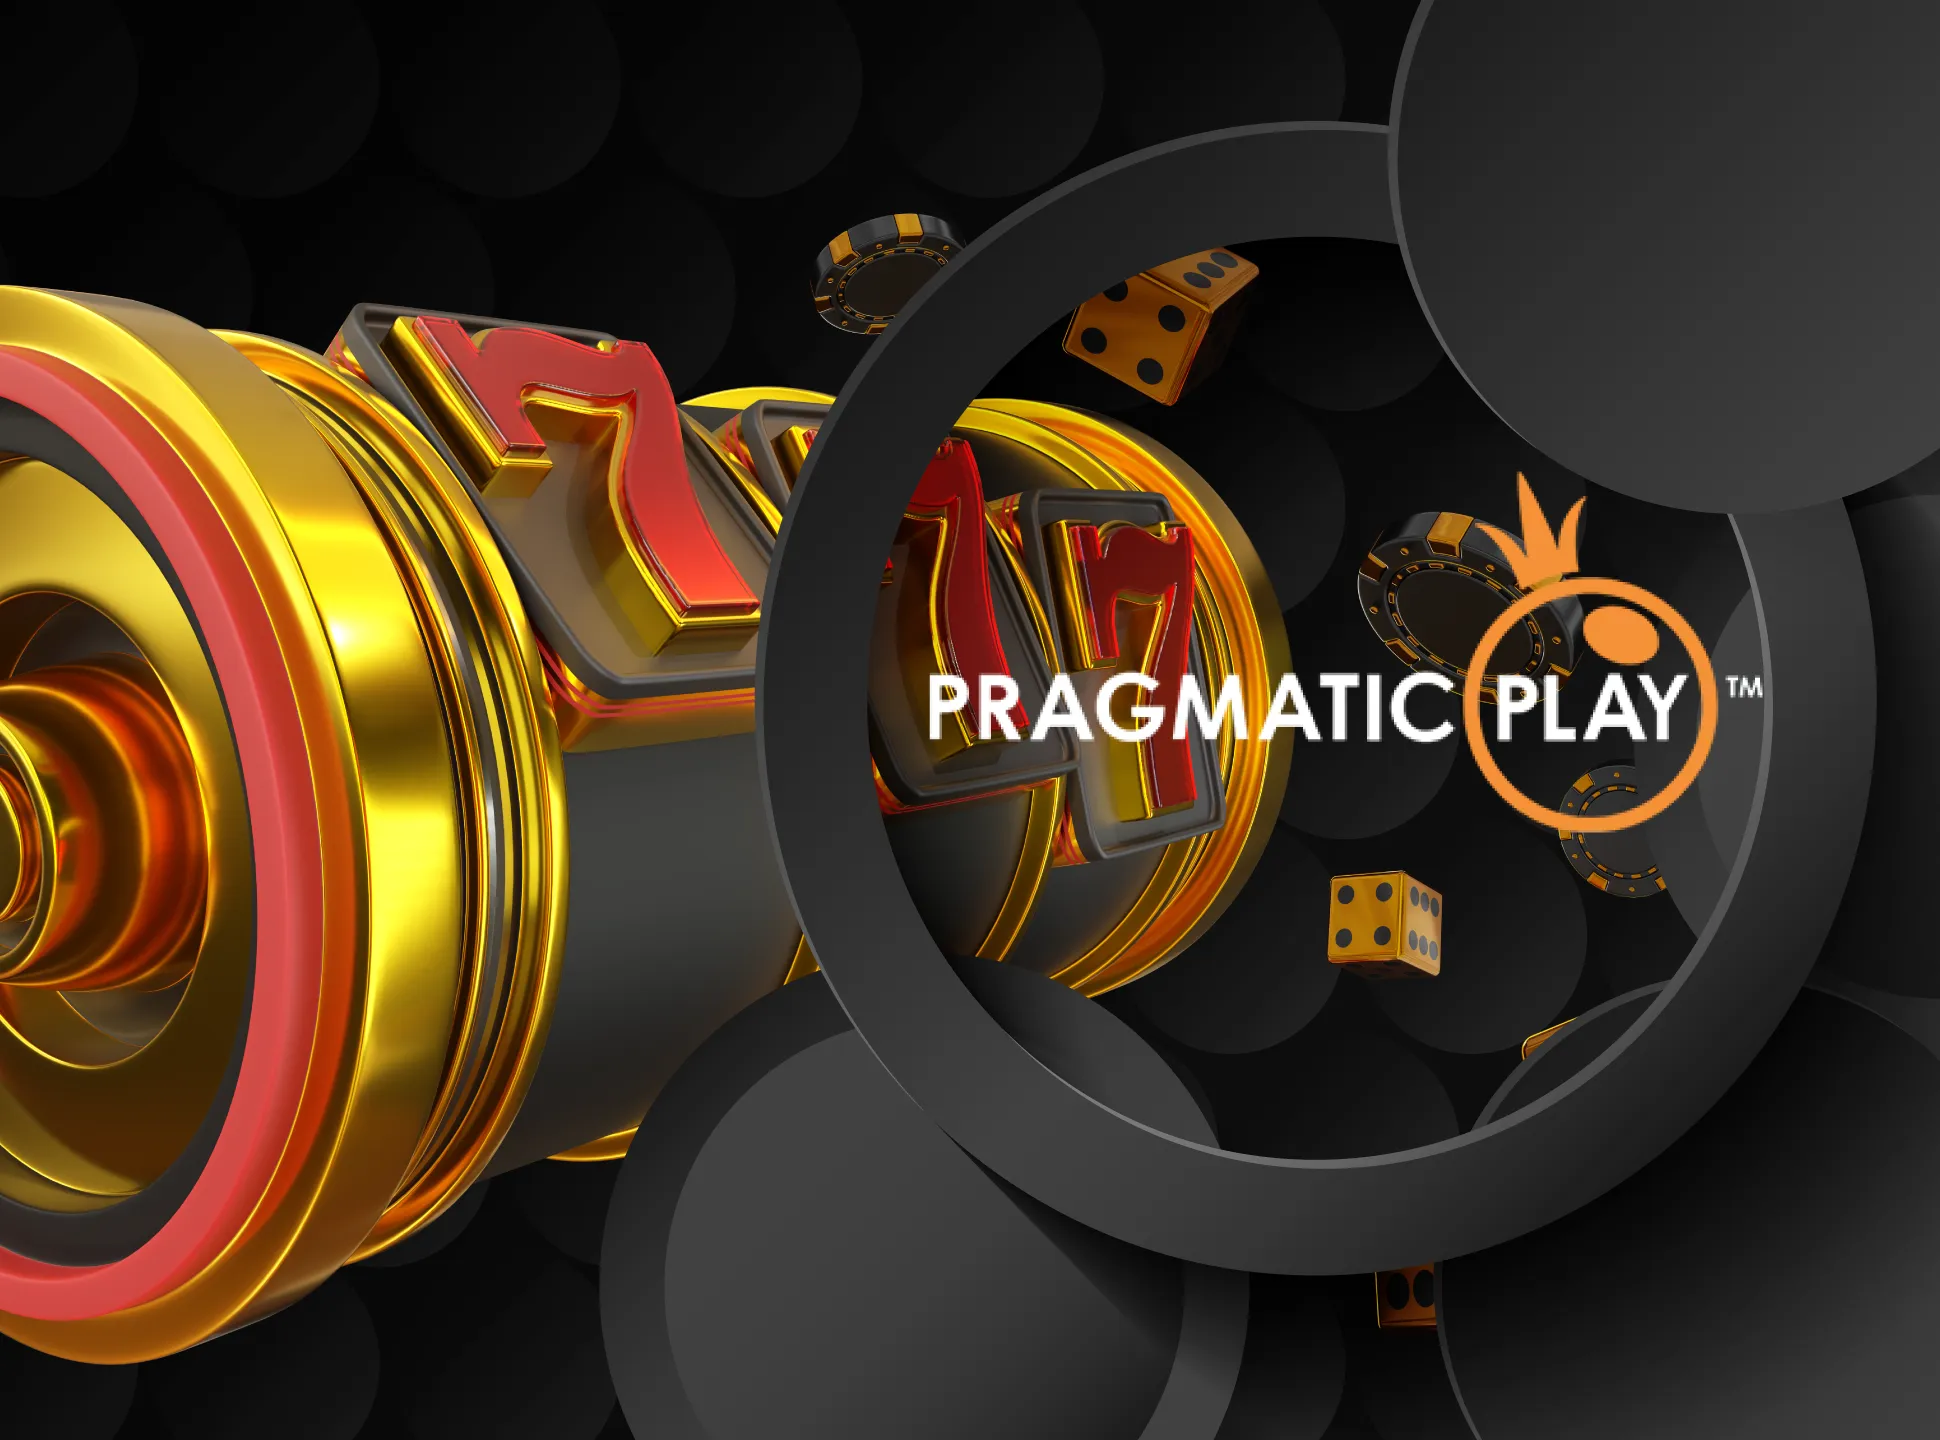 Pragmatic Play is known for its great TV slots.